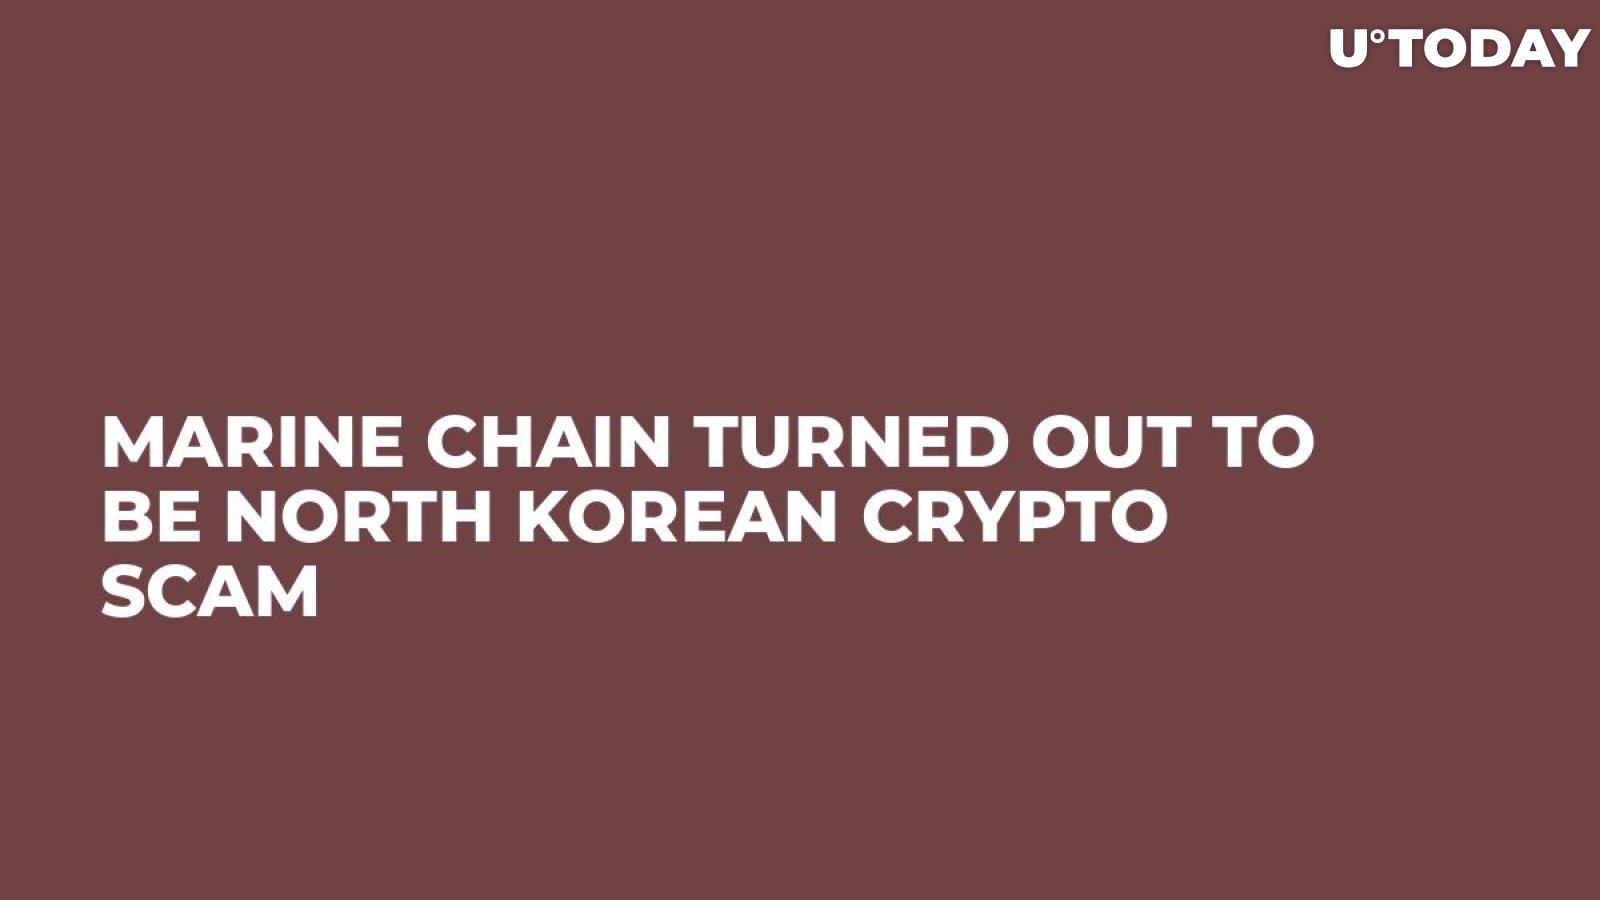 Marine Chain Turned Out to Be North Korean Crypto Scam